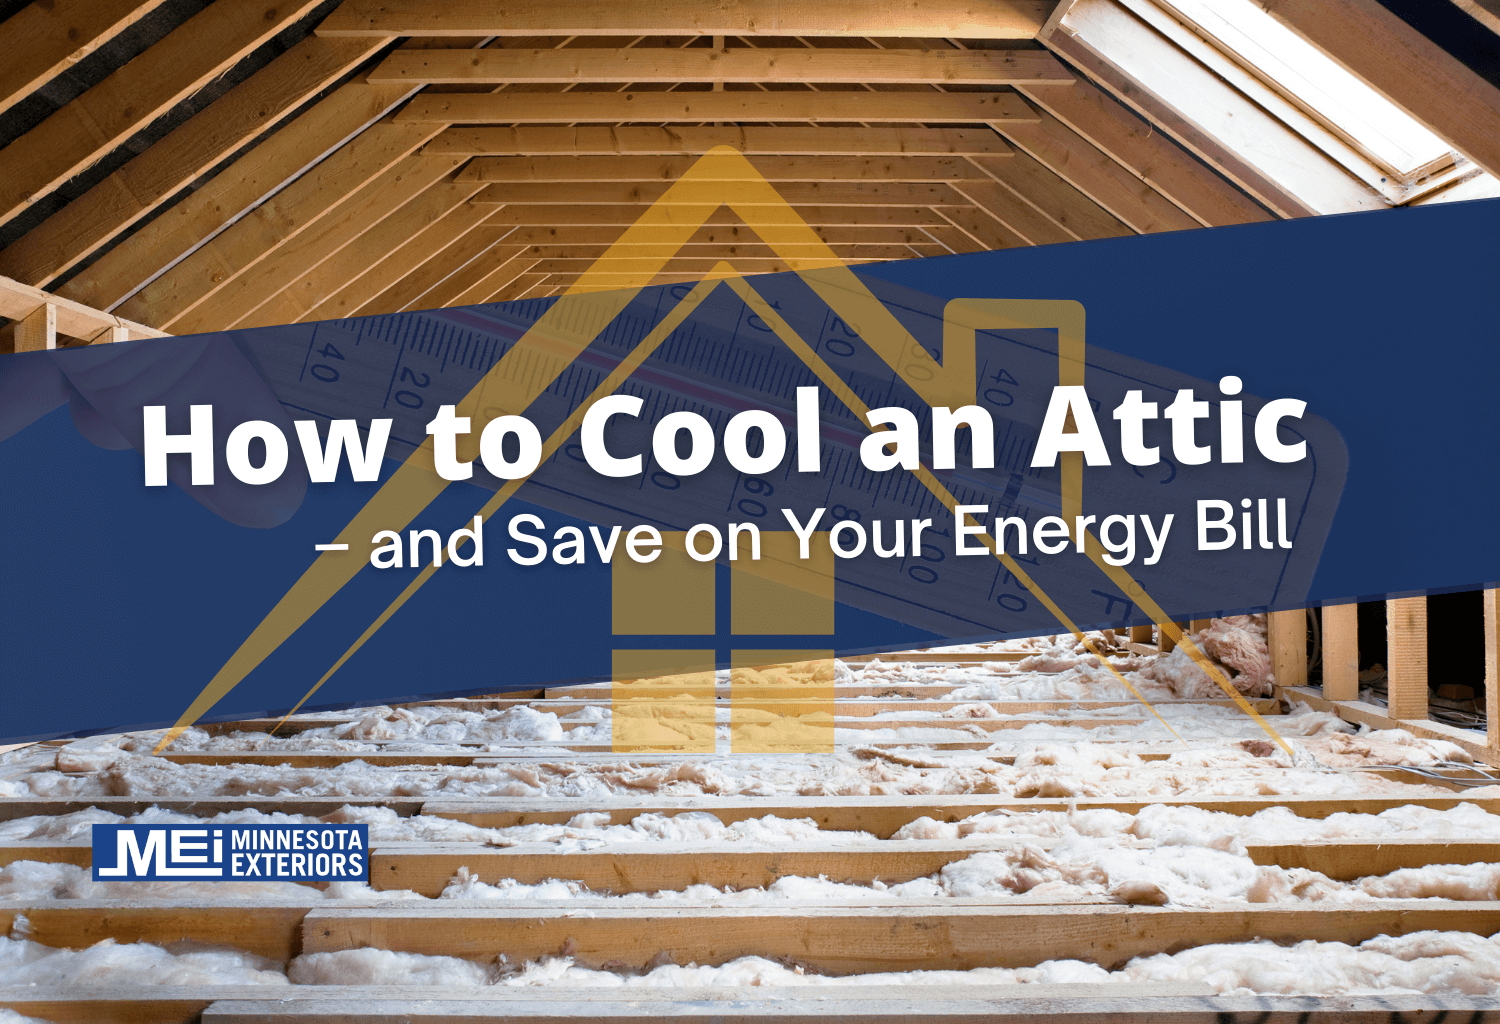 How to cool an attic